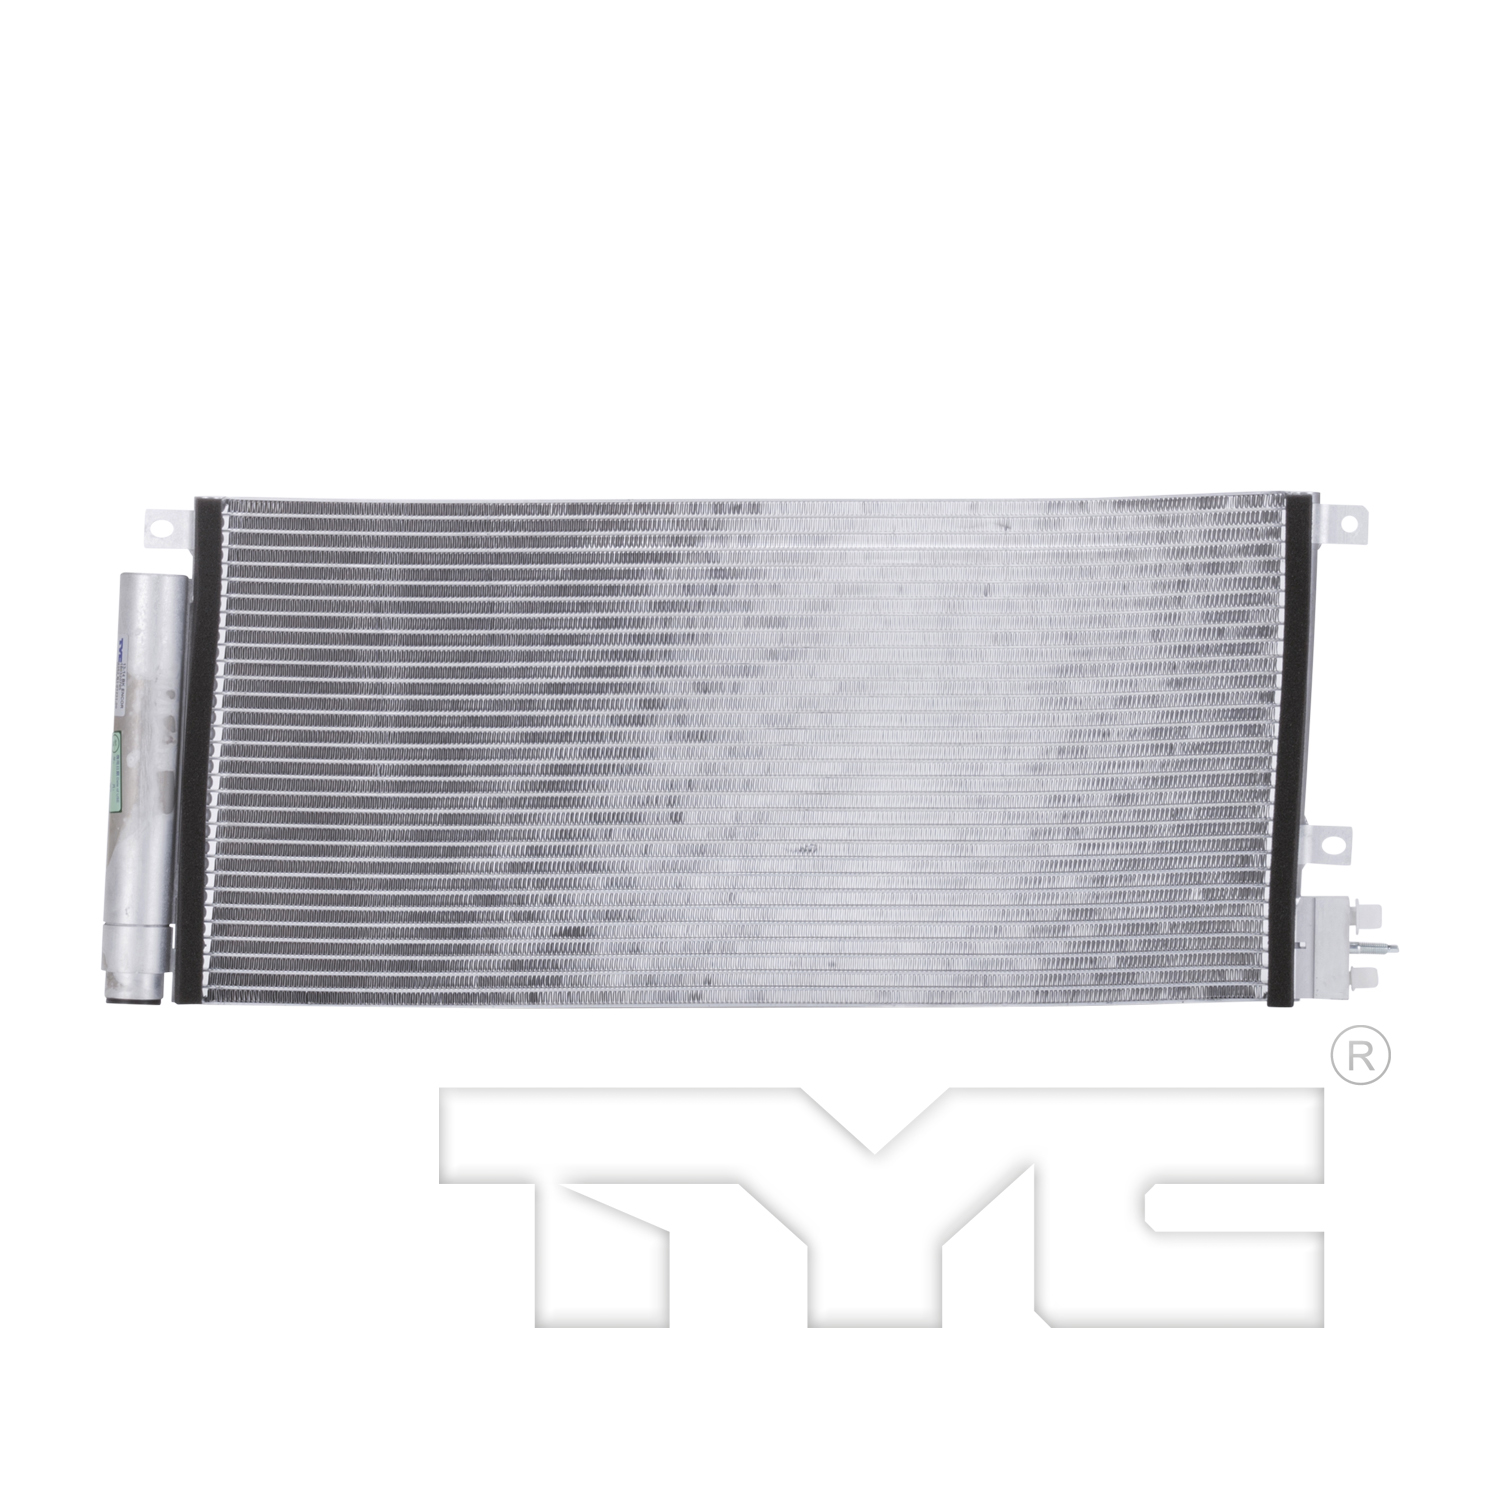 Aftermarket AC CONDENSERS for BUICK - ENCORE, ENCORE,13-14,Air conditioning condenser